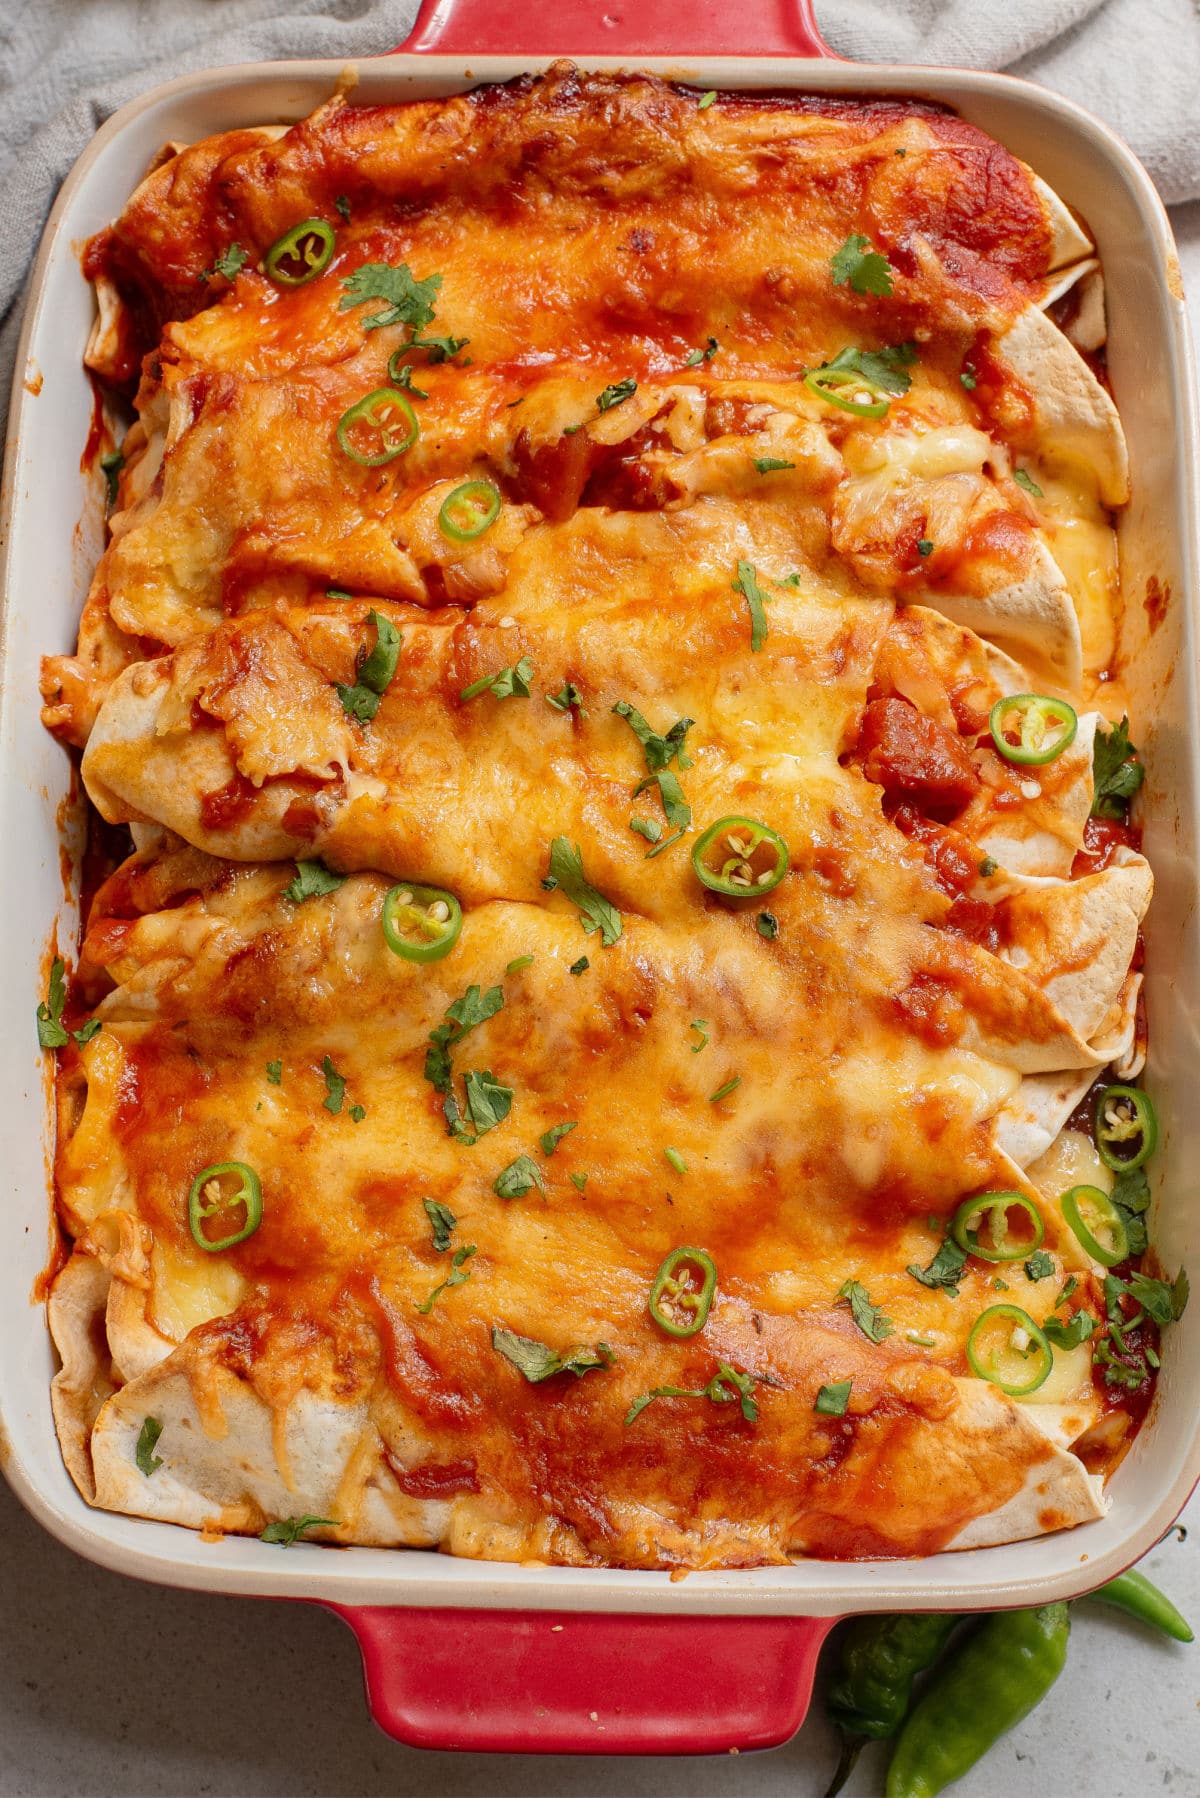 Chicken enchiladas in a casserole dish with diced jalapeno and green onion.